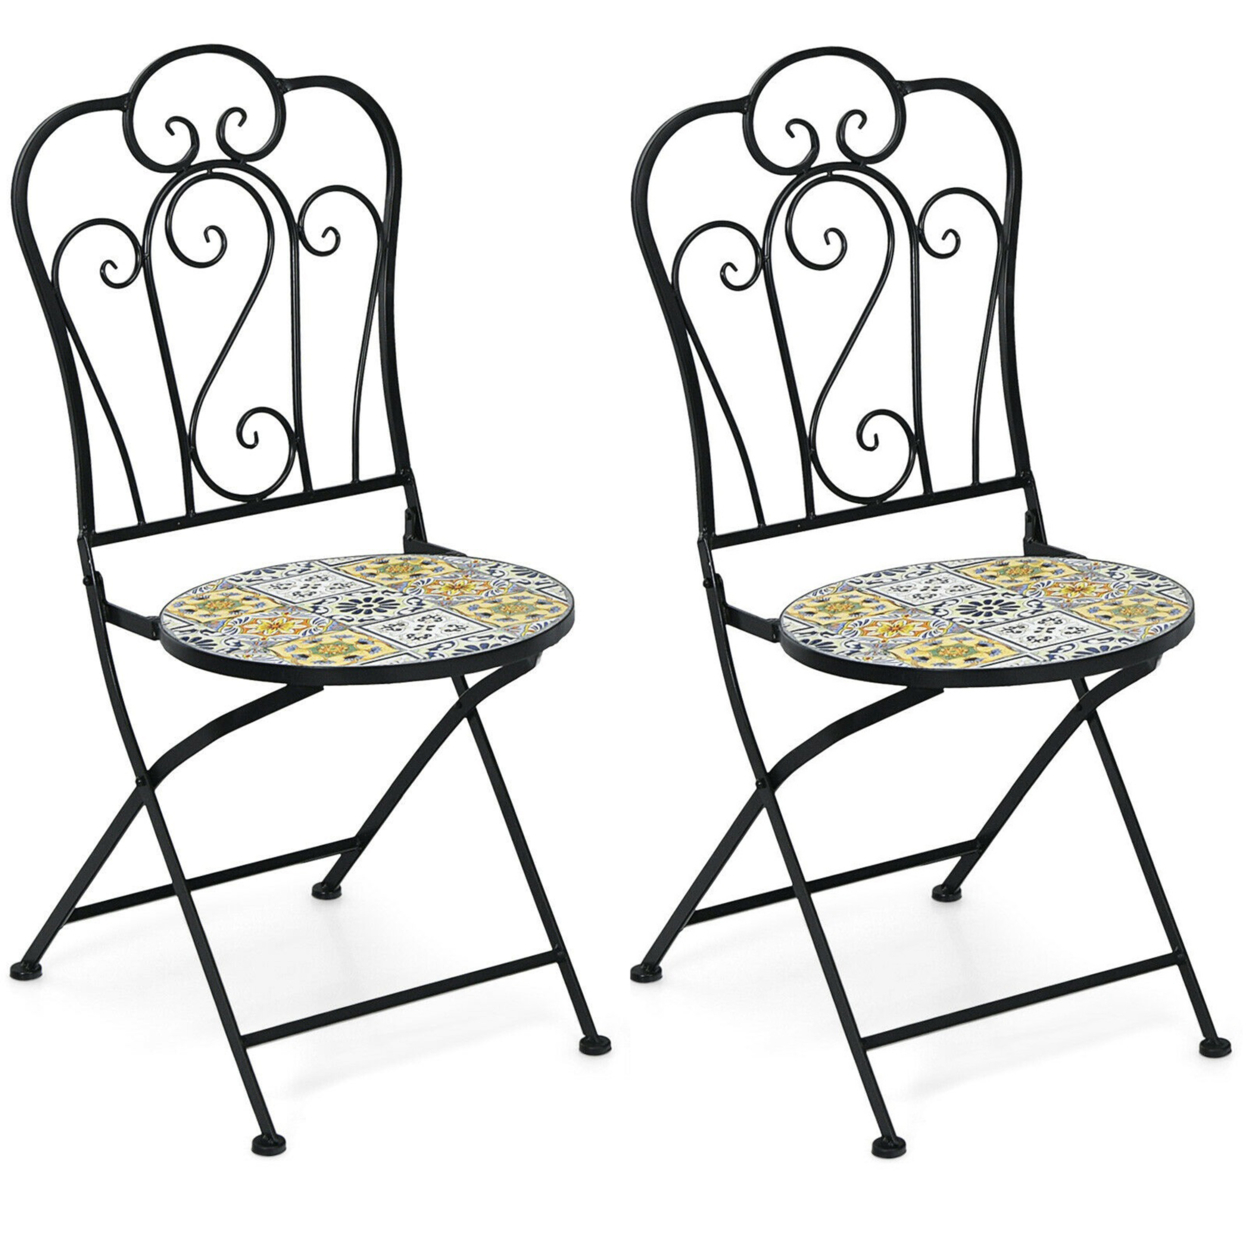 Set Of 2 Folding Bistro Chairs Mosaic Patio Chairs Outdoor Dining Chairs